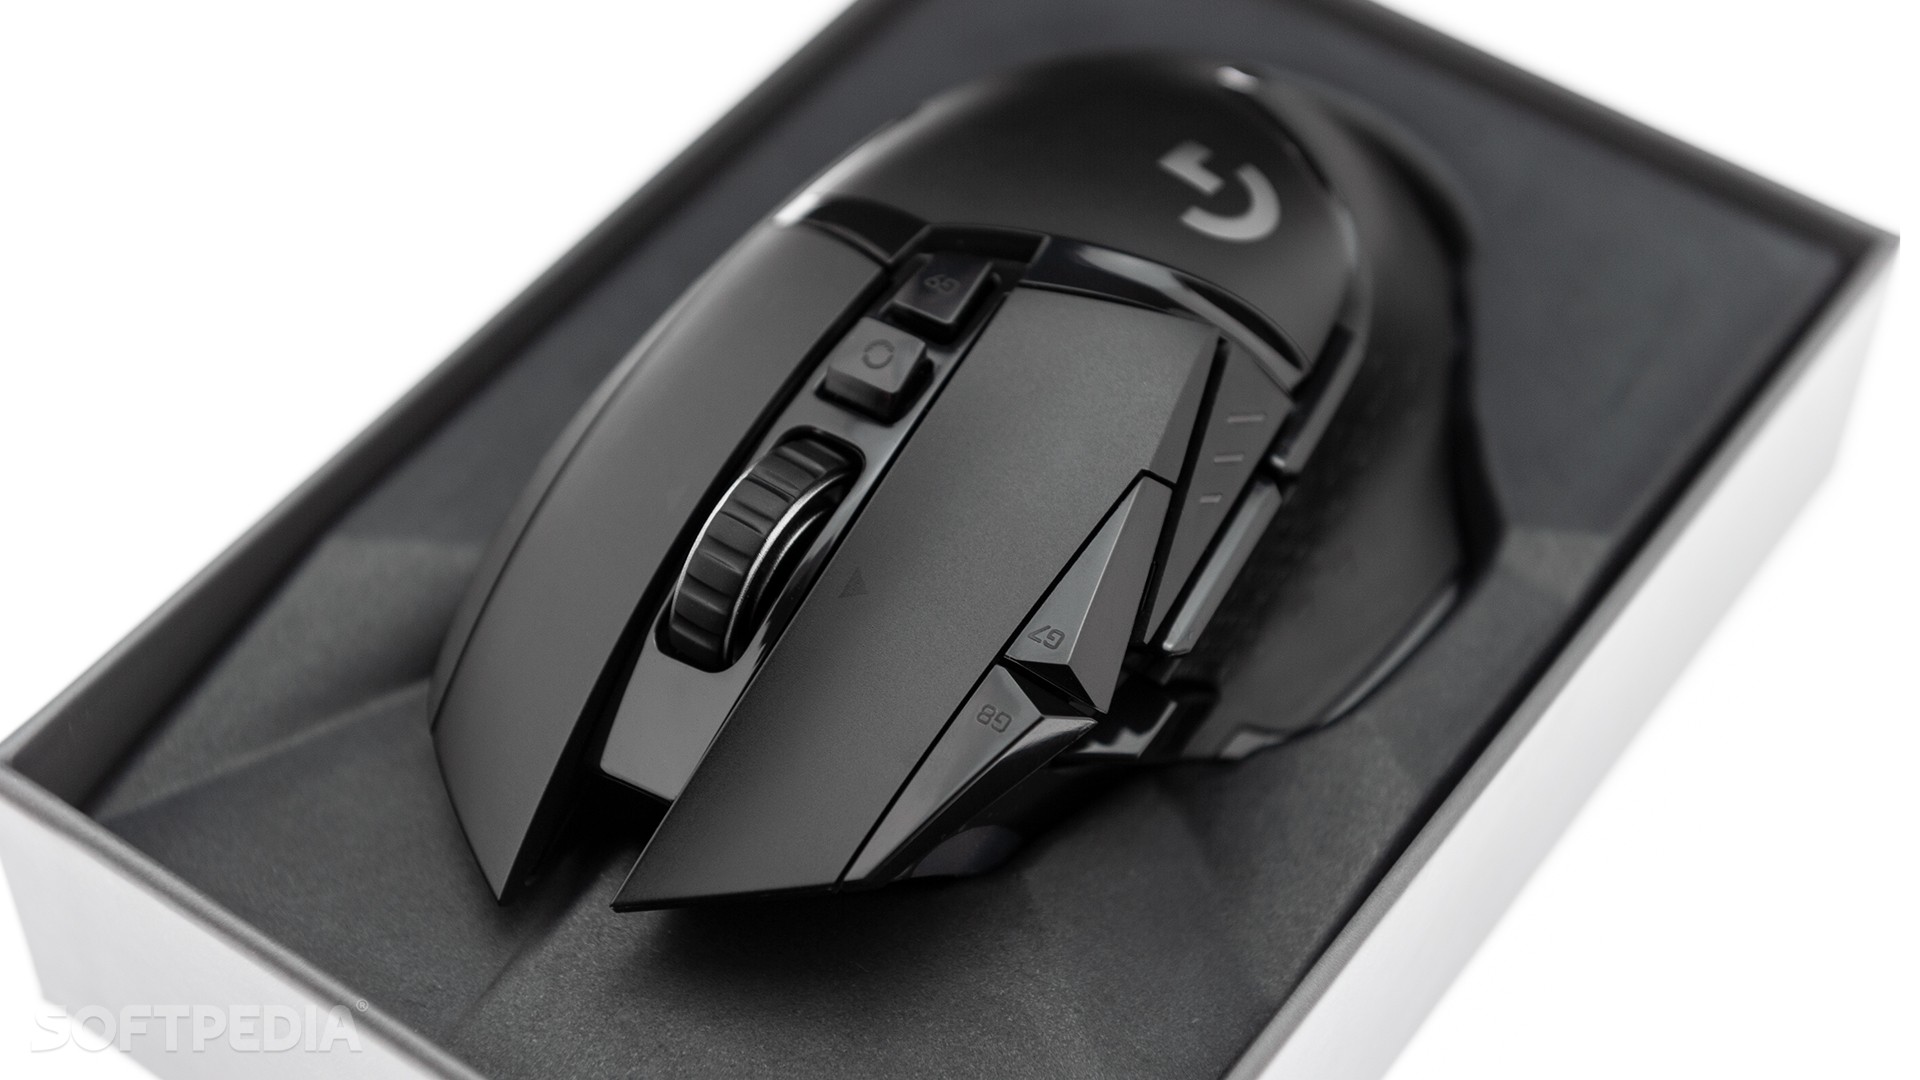 g502 driver download